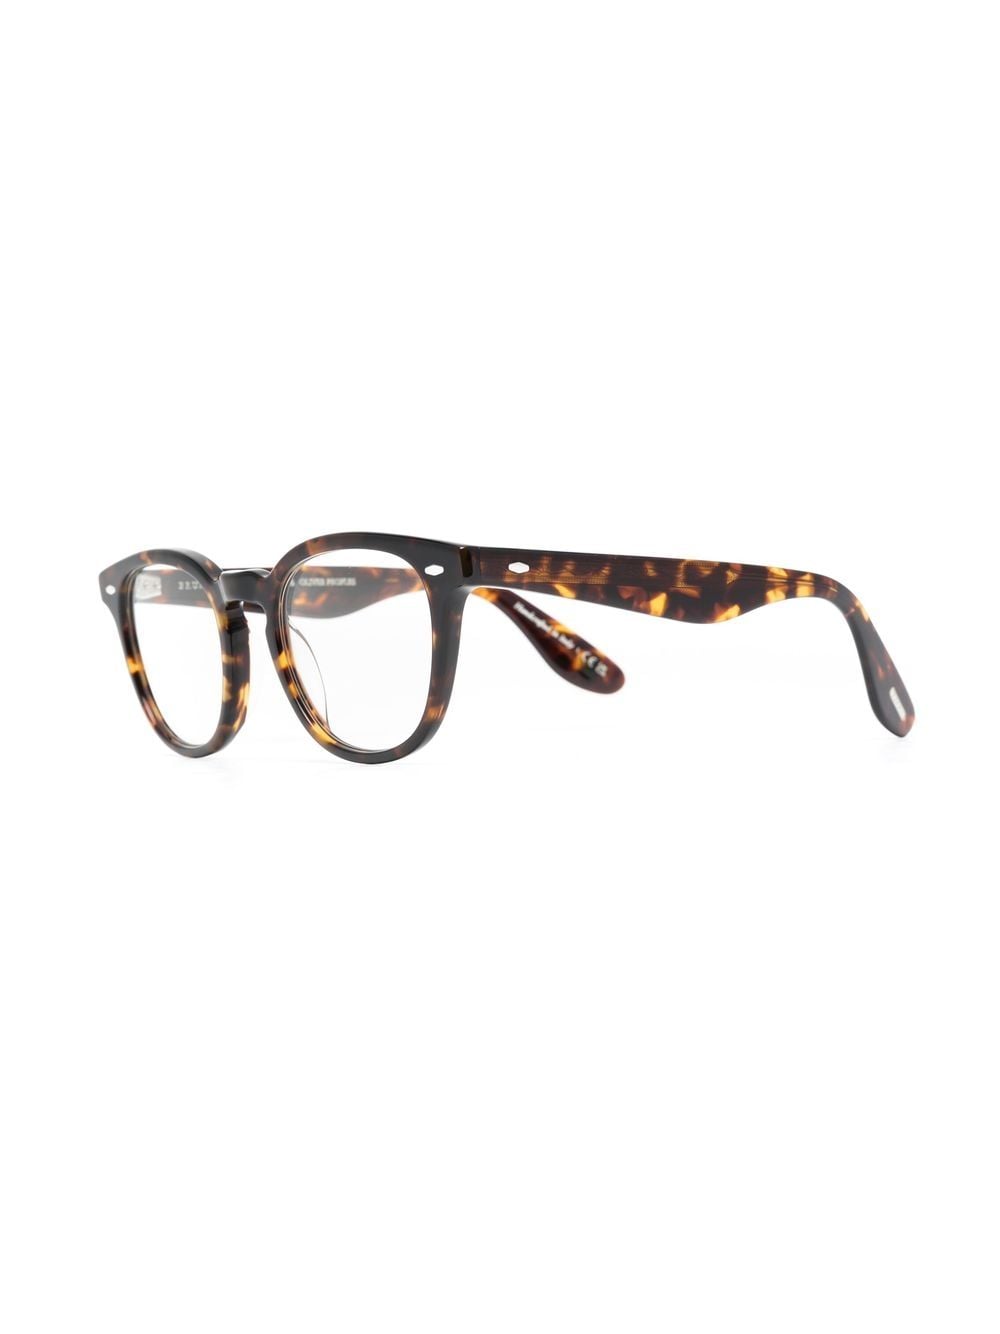 Image 2 of Oliver Peoples tortoiseshell-effect square glasses